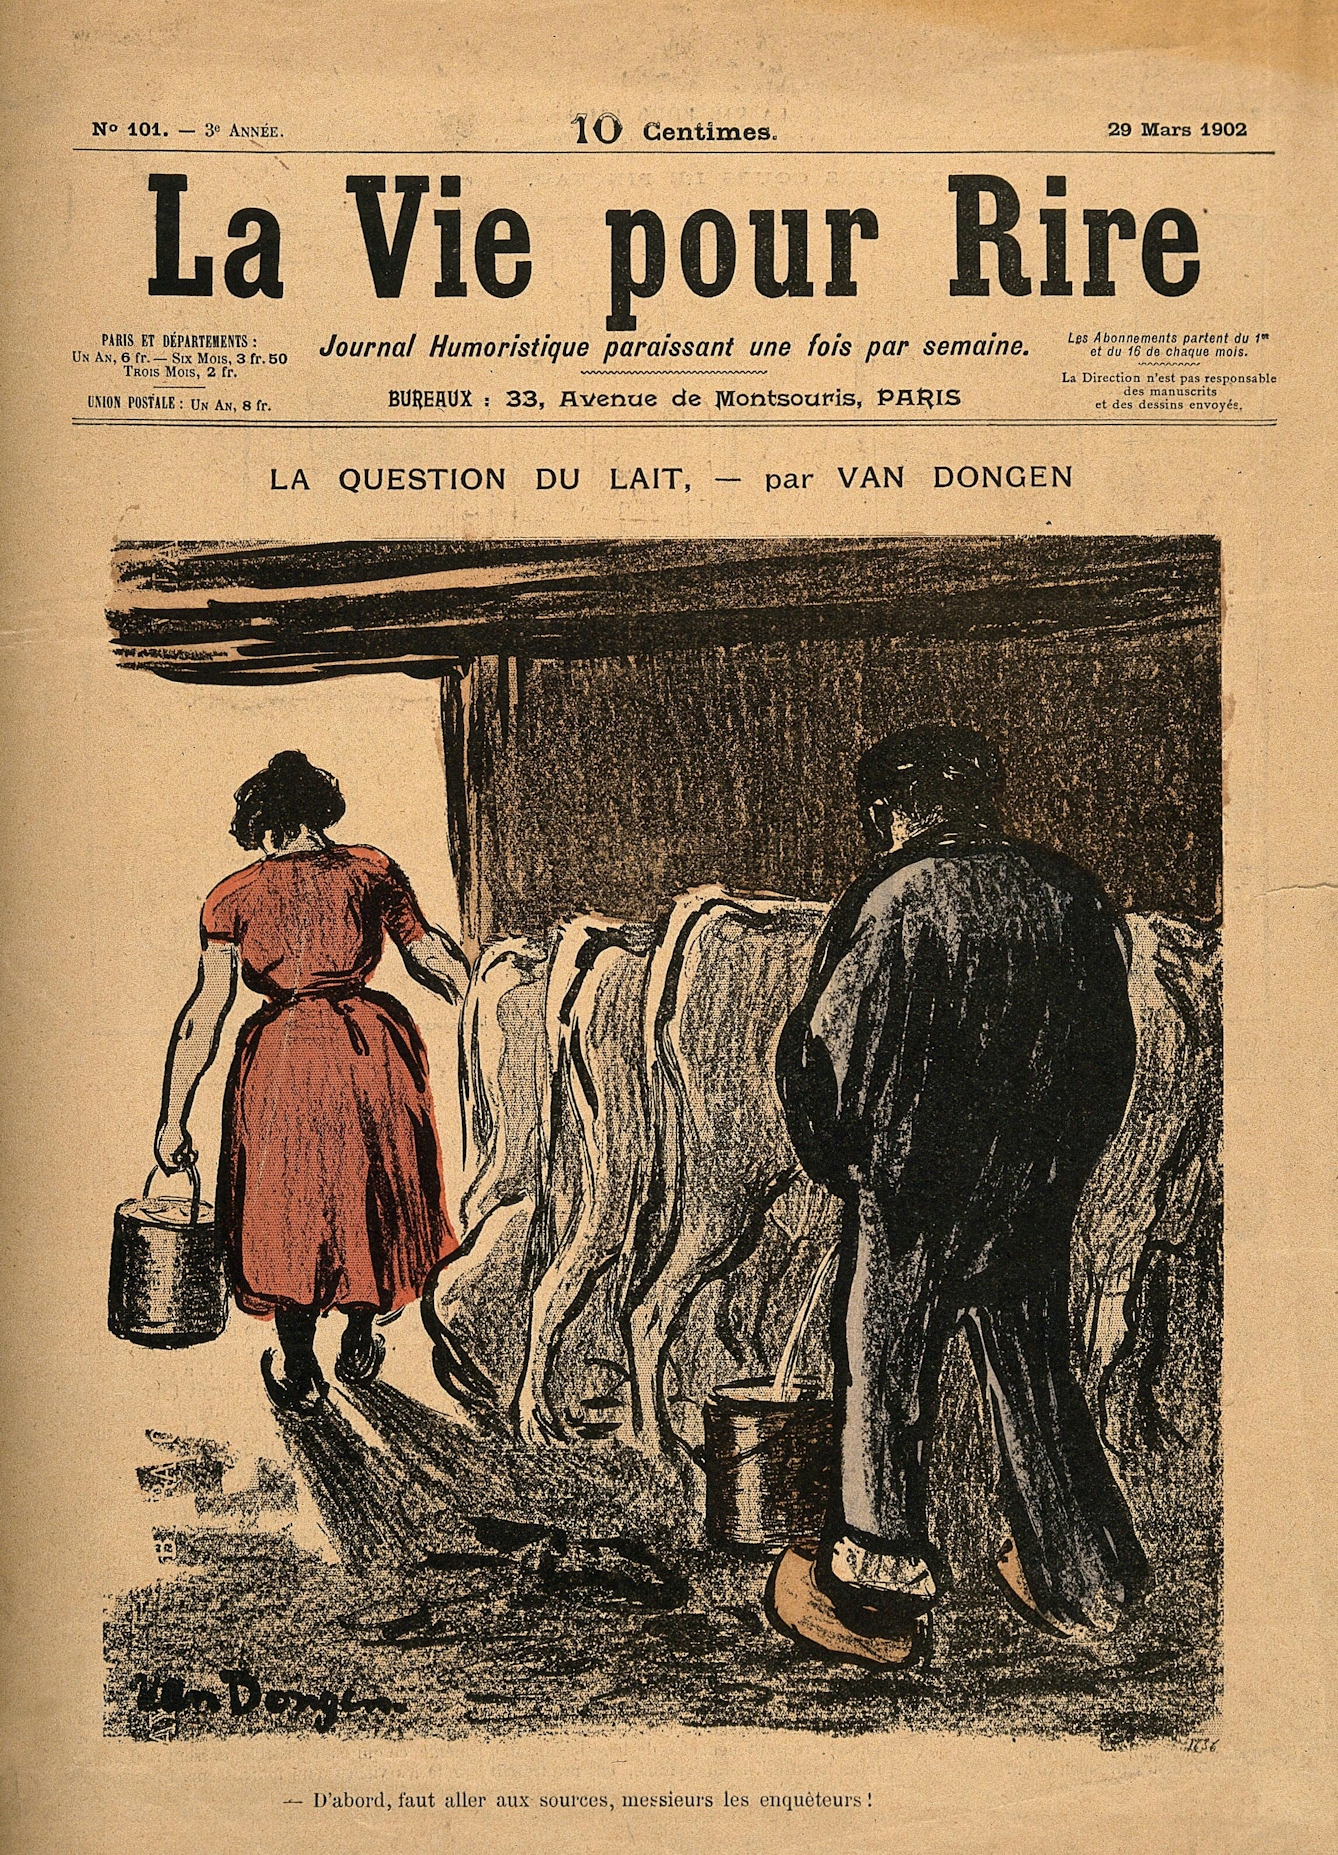 Magazine "La Vie pour Rire" cover with a coloured pencil drawing showing a woman in a red dress carrying a heavy pail and walking away from three cows in a row. A man in dark clothing urinates into a bucket beside the udders of one of the cows. The French text below translated means "First you have to go to the sources, gentlemen investigators!"